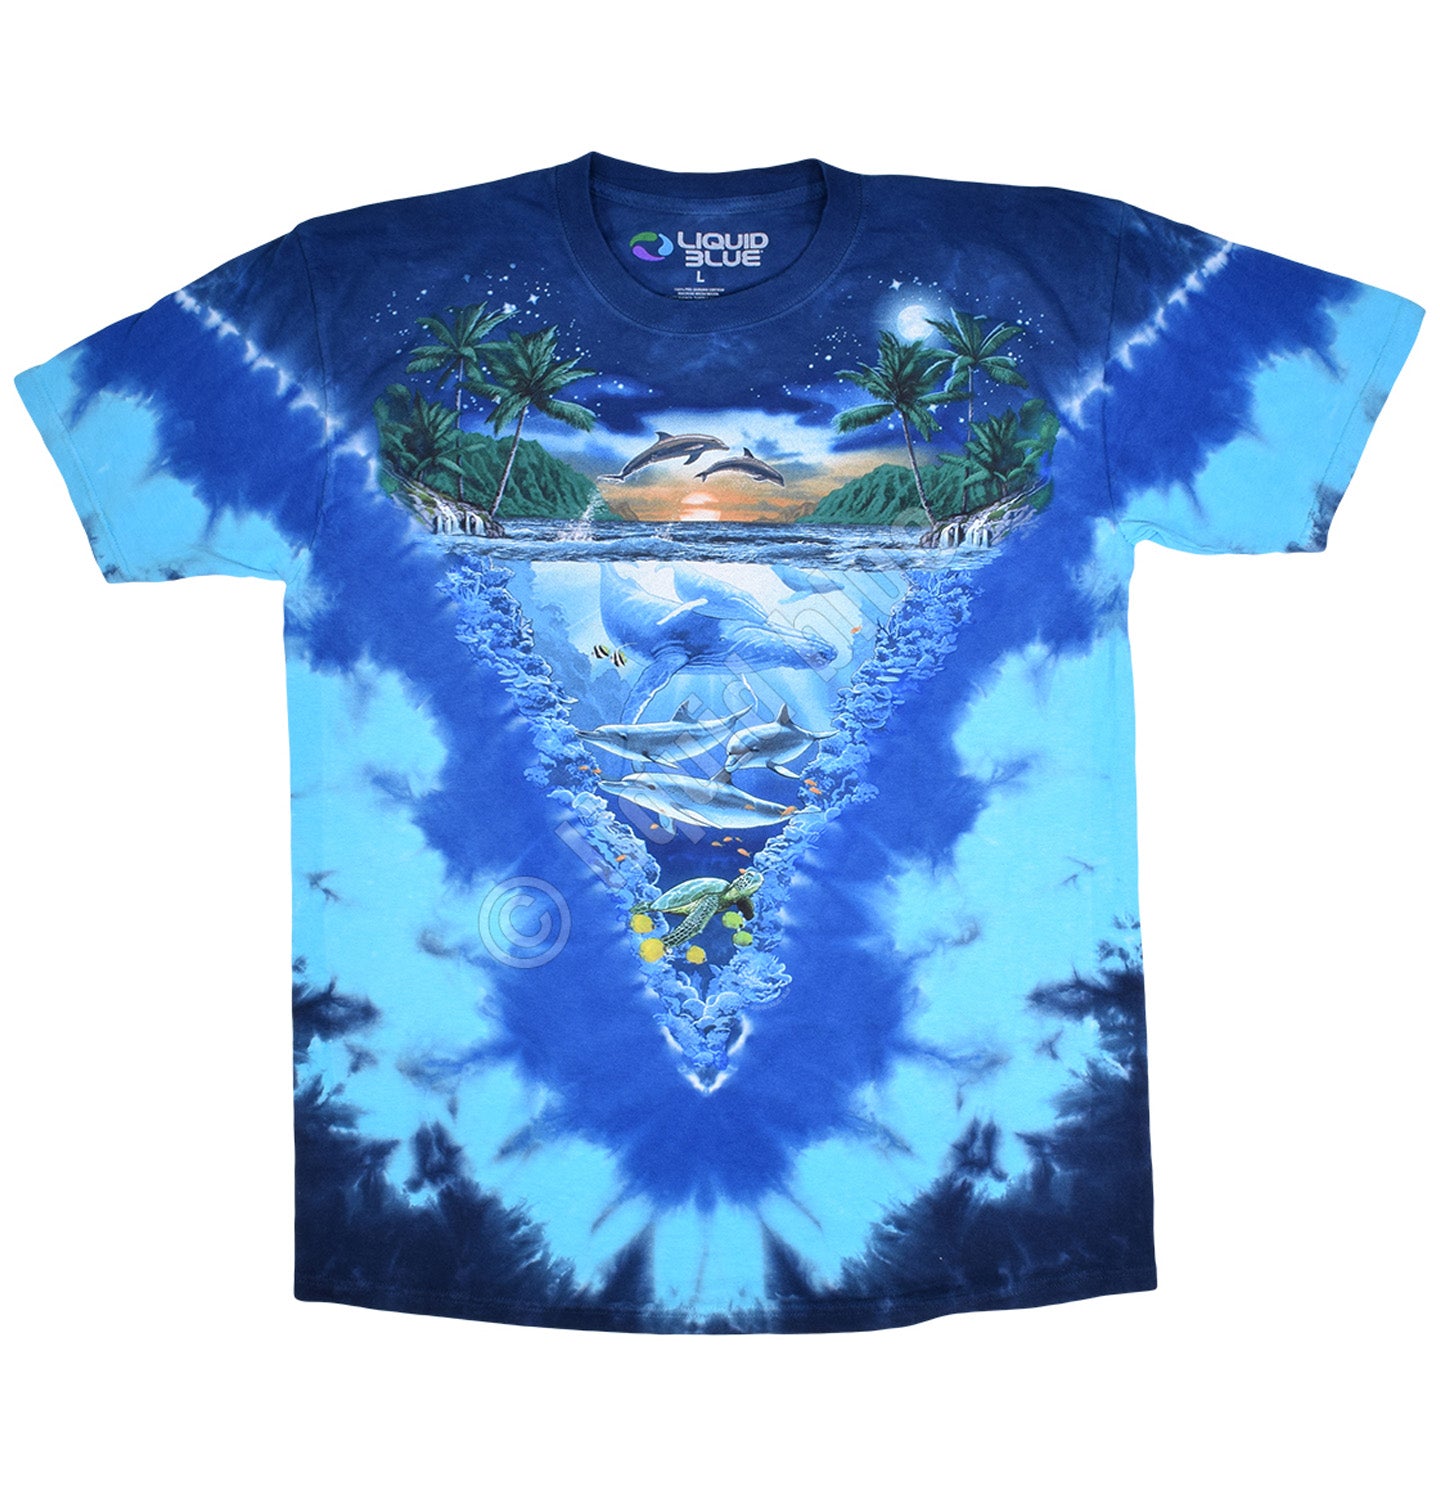 Night Time Dive - Adult Unisex T-Shirt